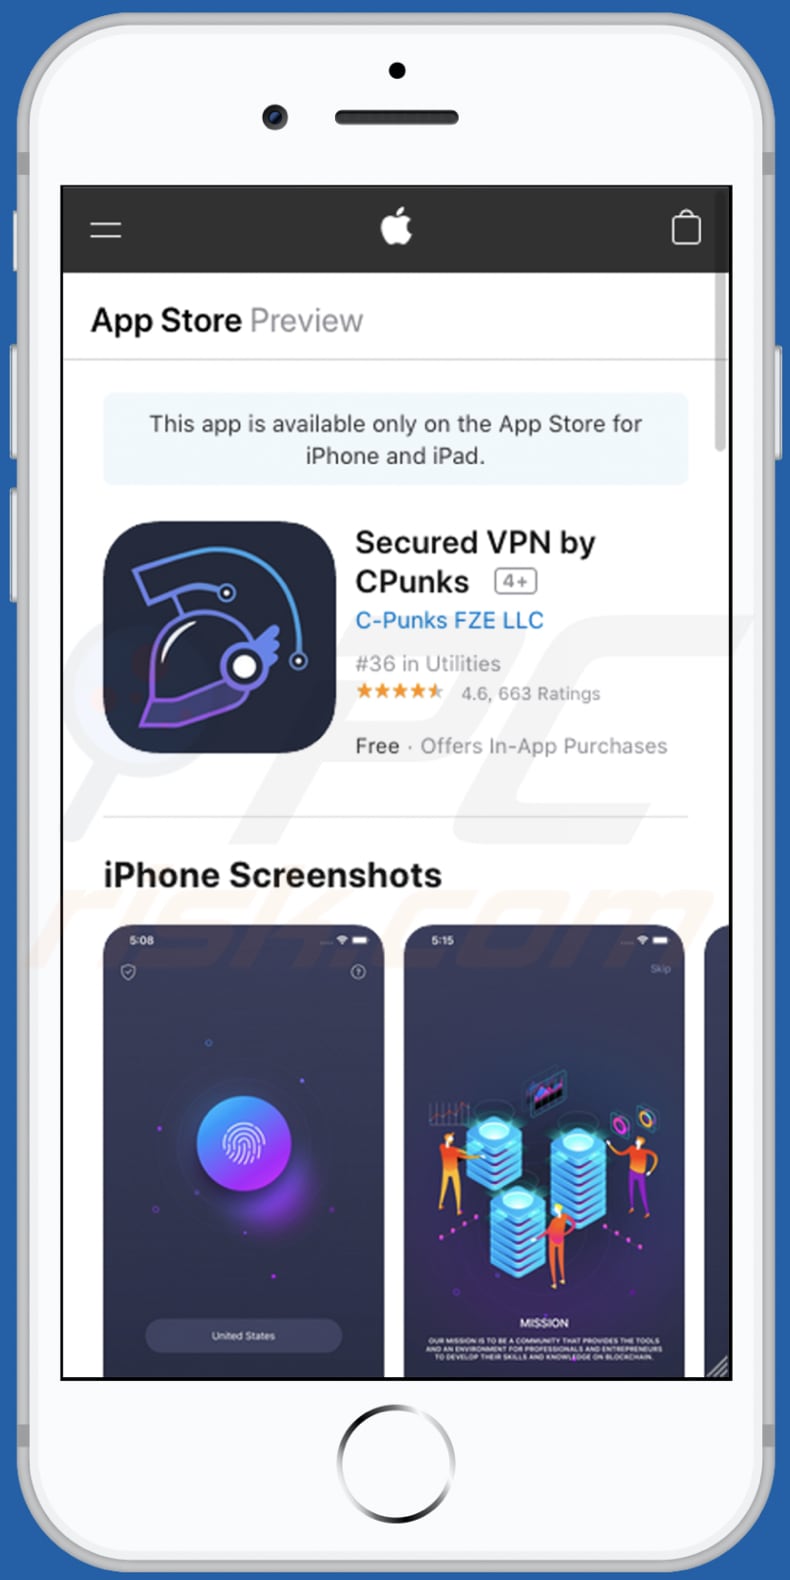 Secured VPN by CPunks on App Store